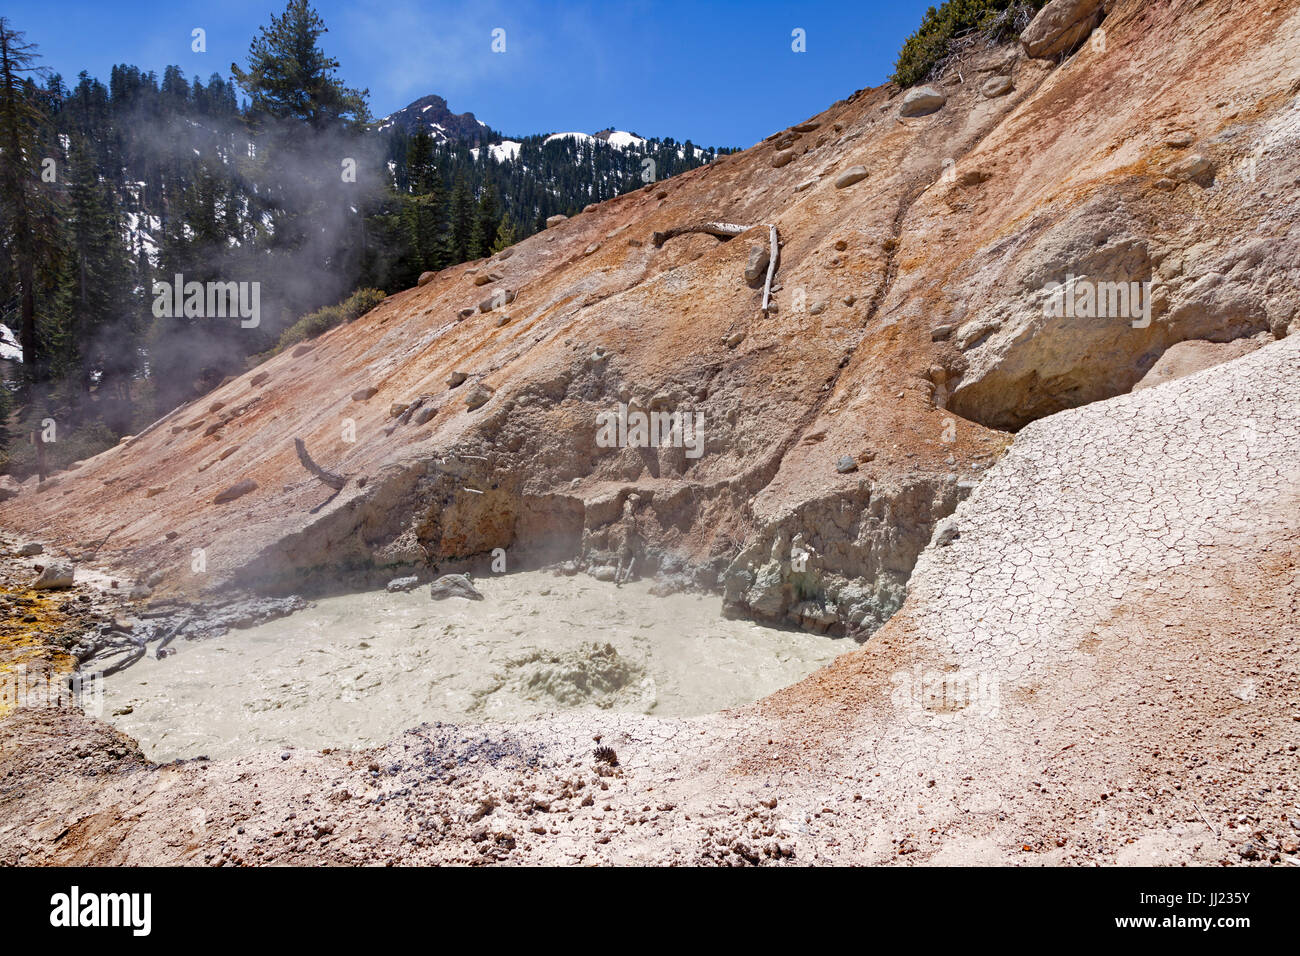 Boiling mud pot at the Sulphur Works in Lassen Volcanic National Park. Stock Photo